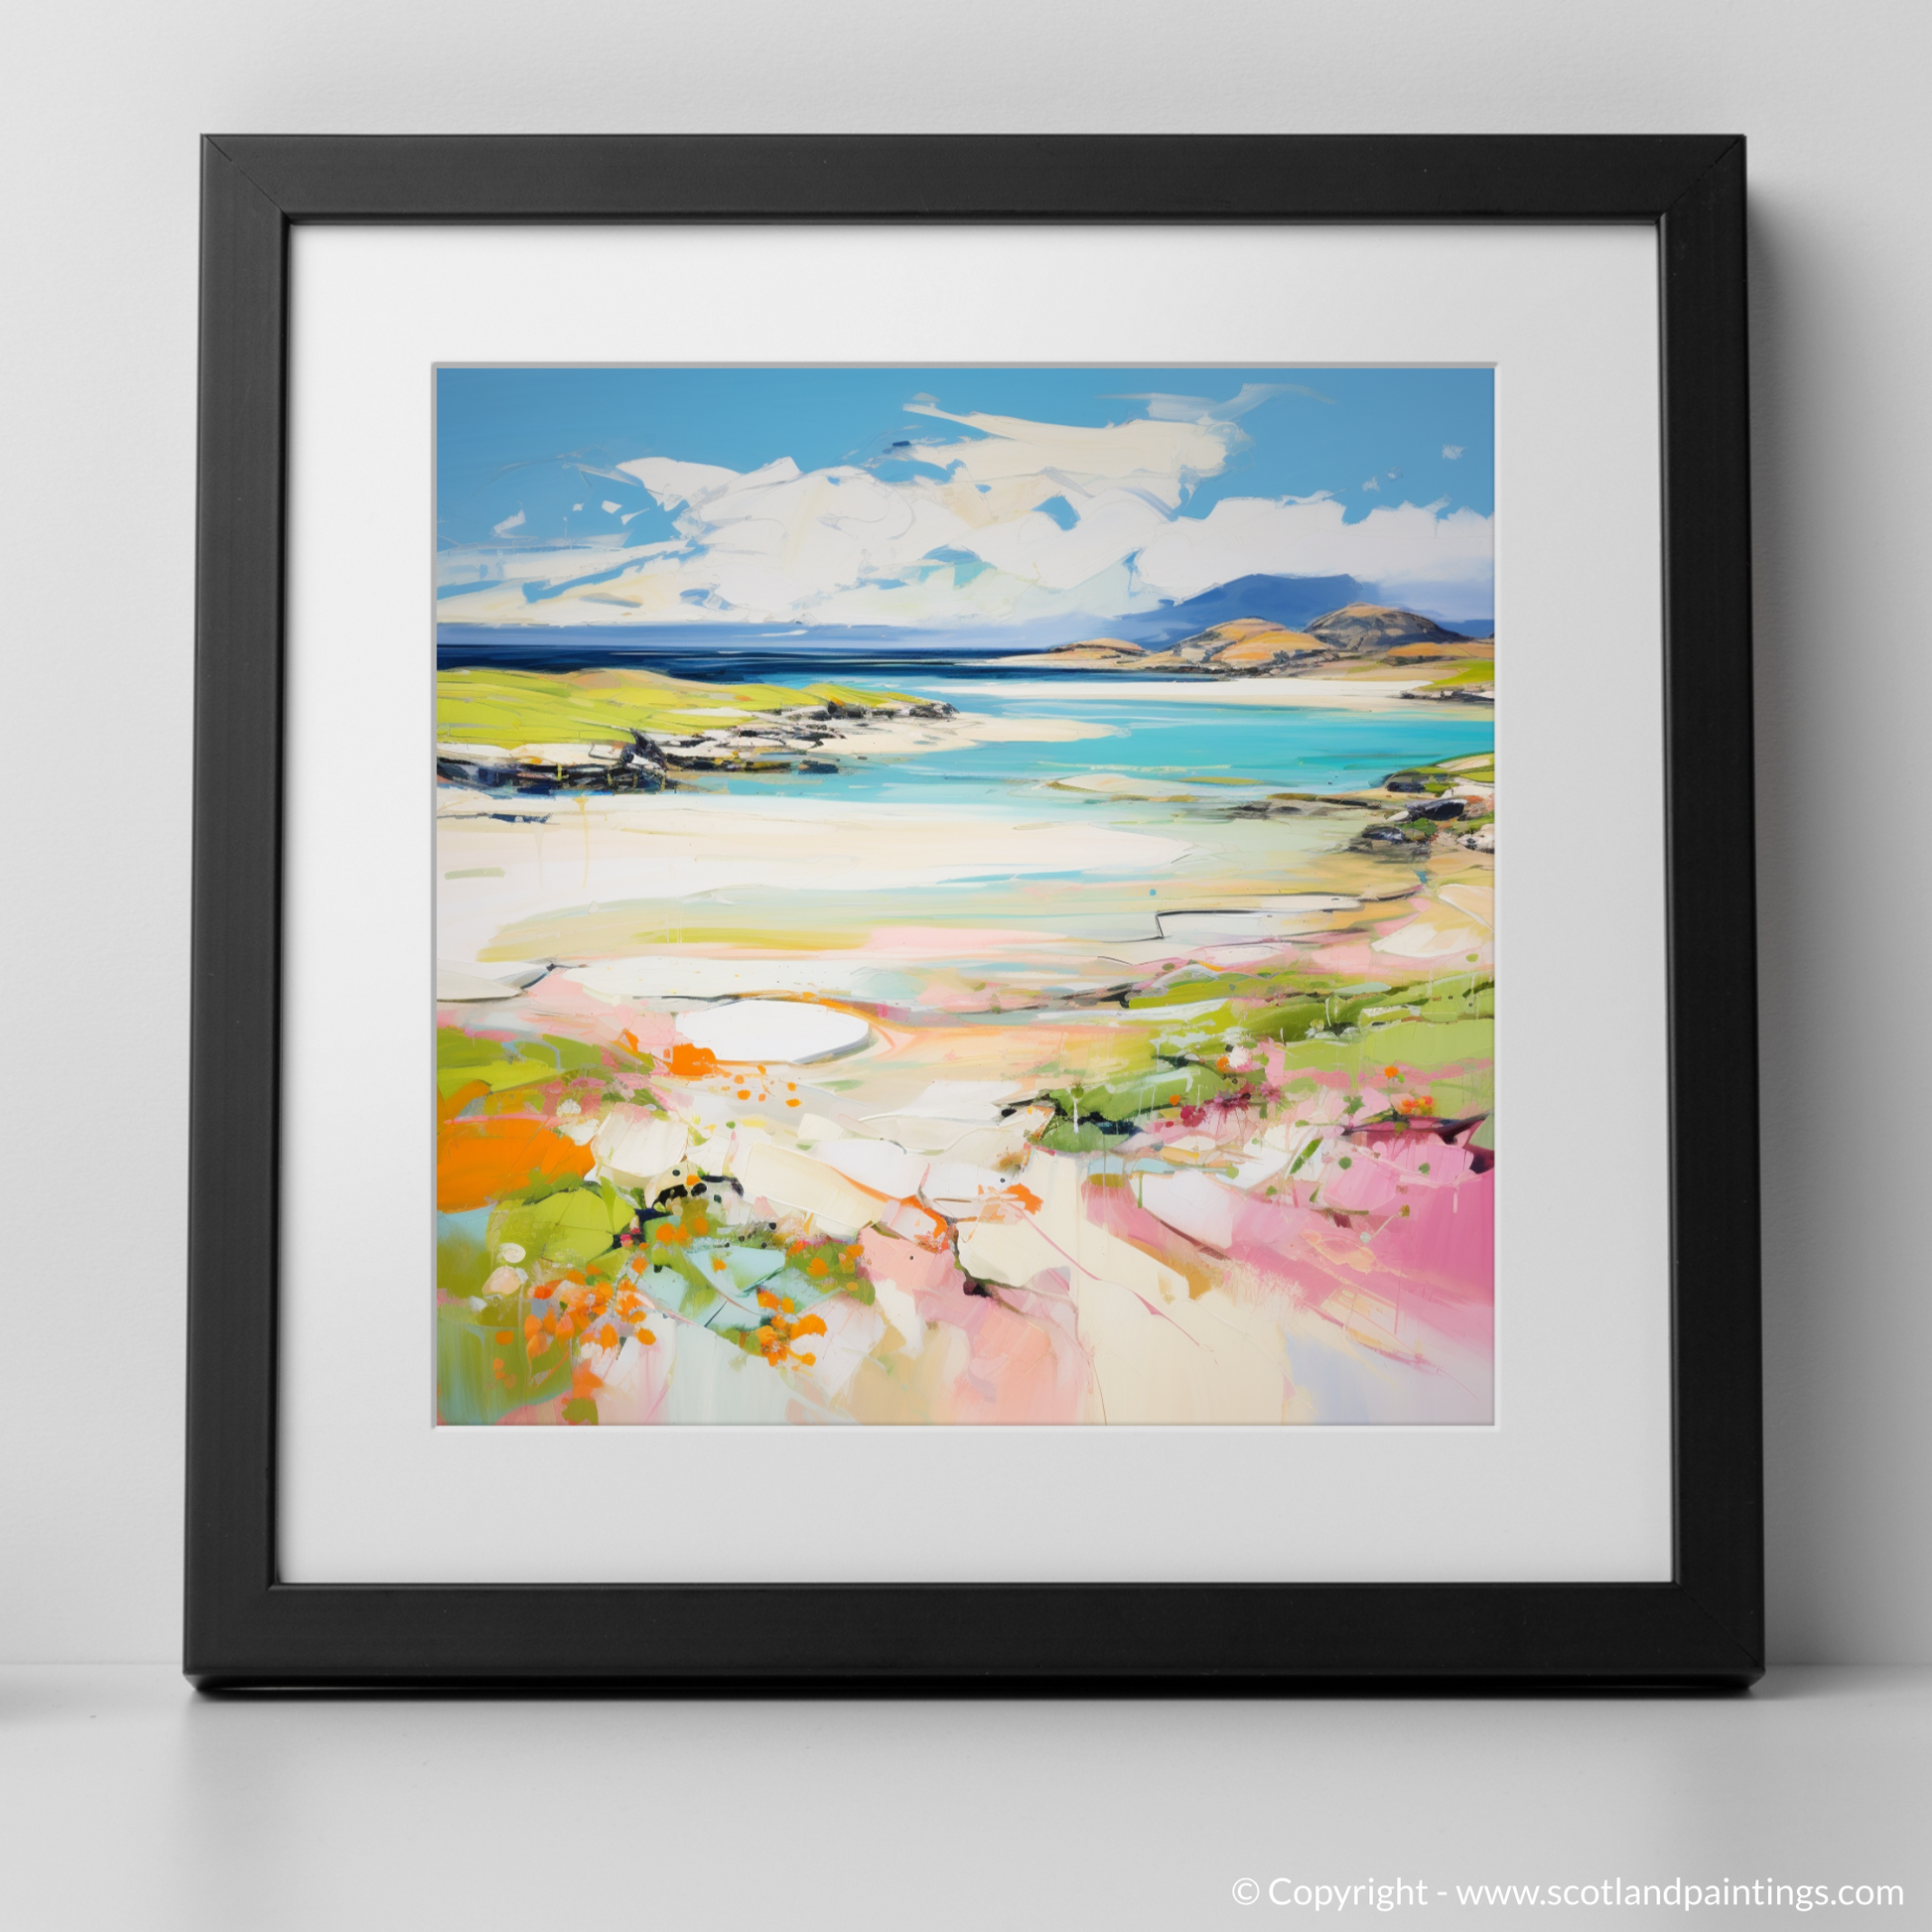 Art Print of Isle of Barra, Outer Hebrides in summer with a black frame